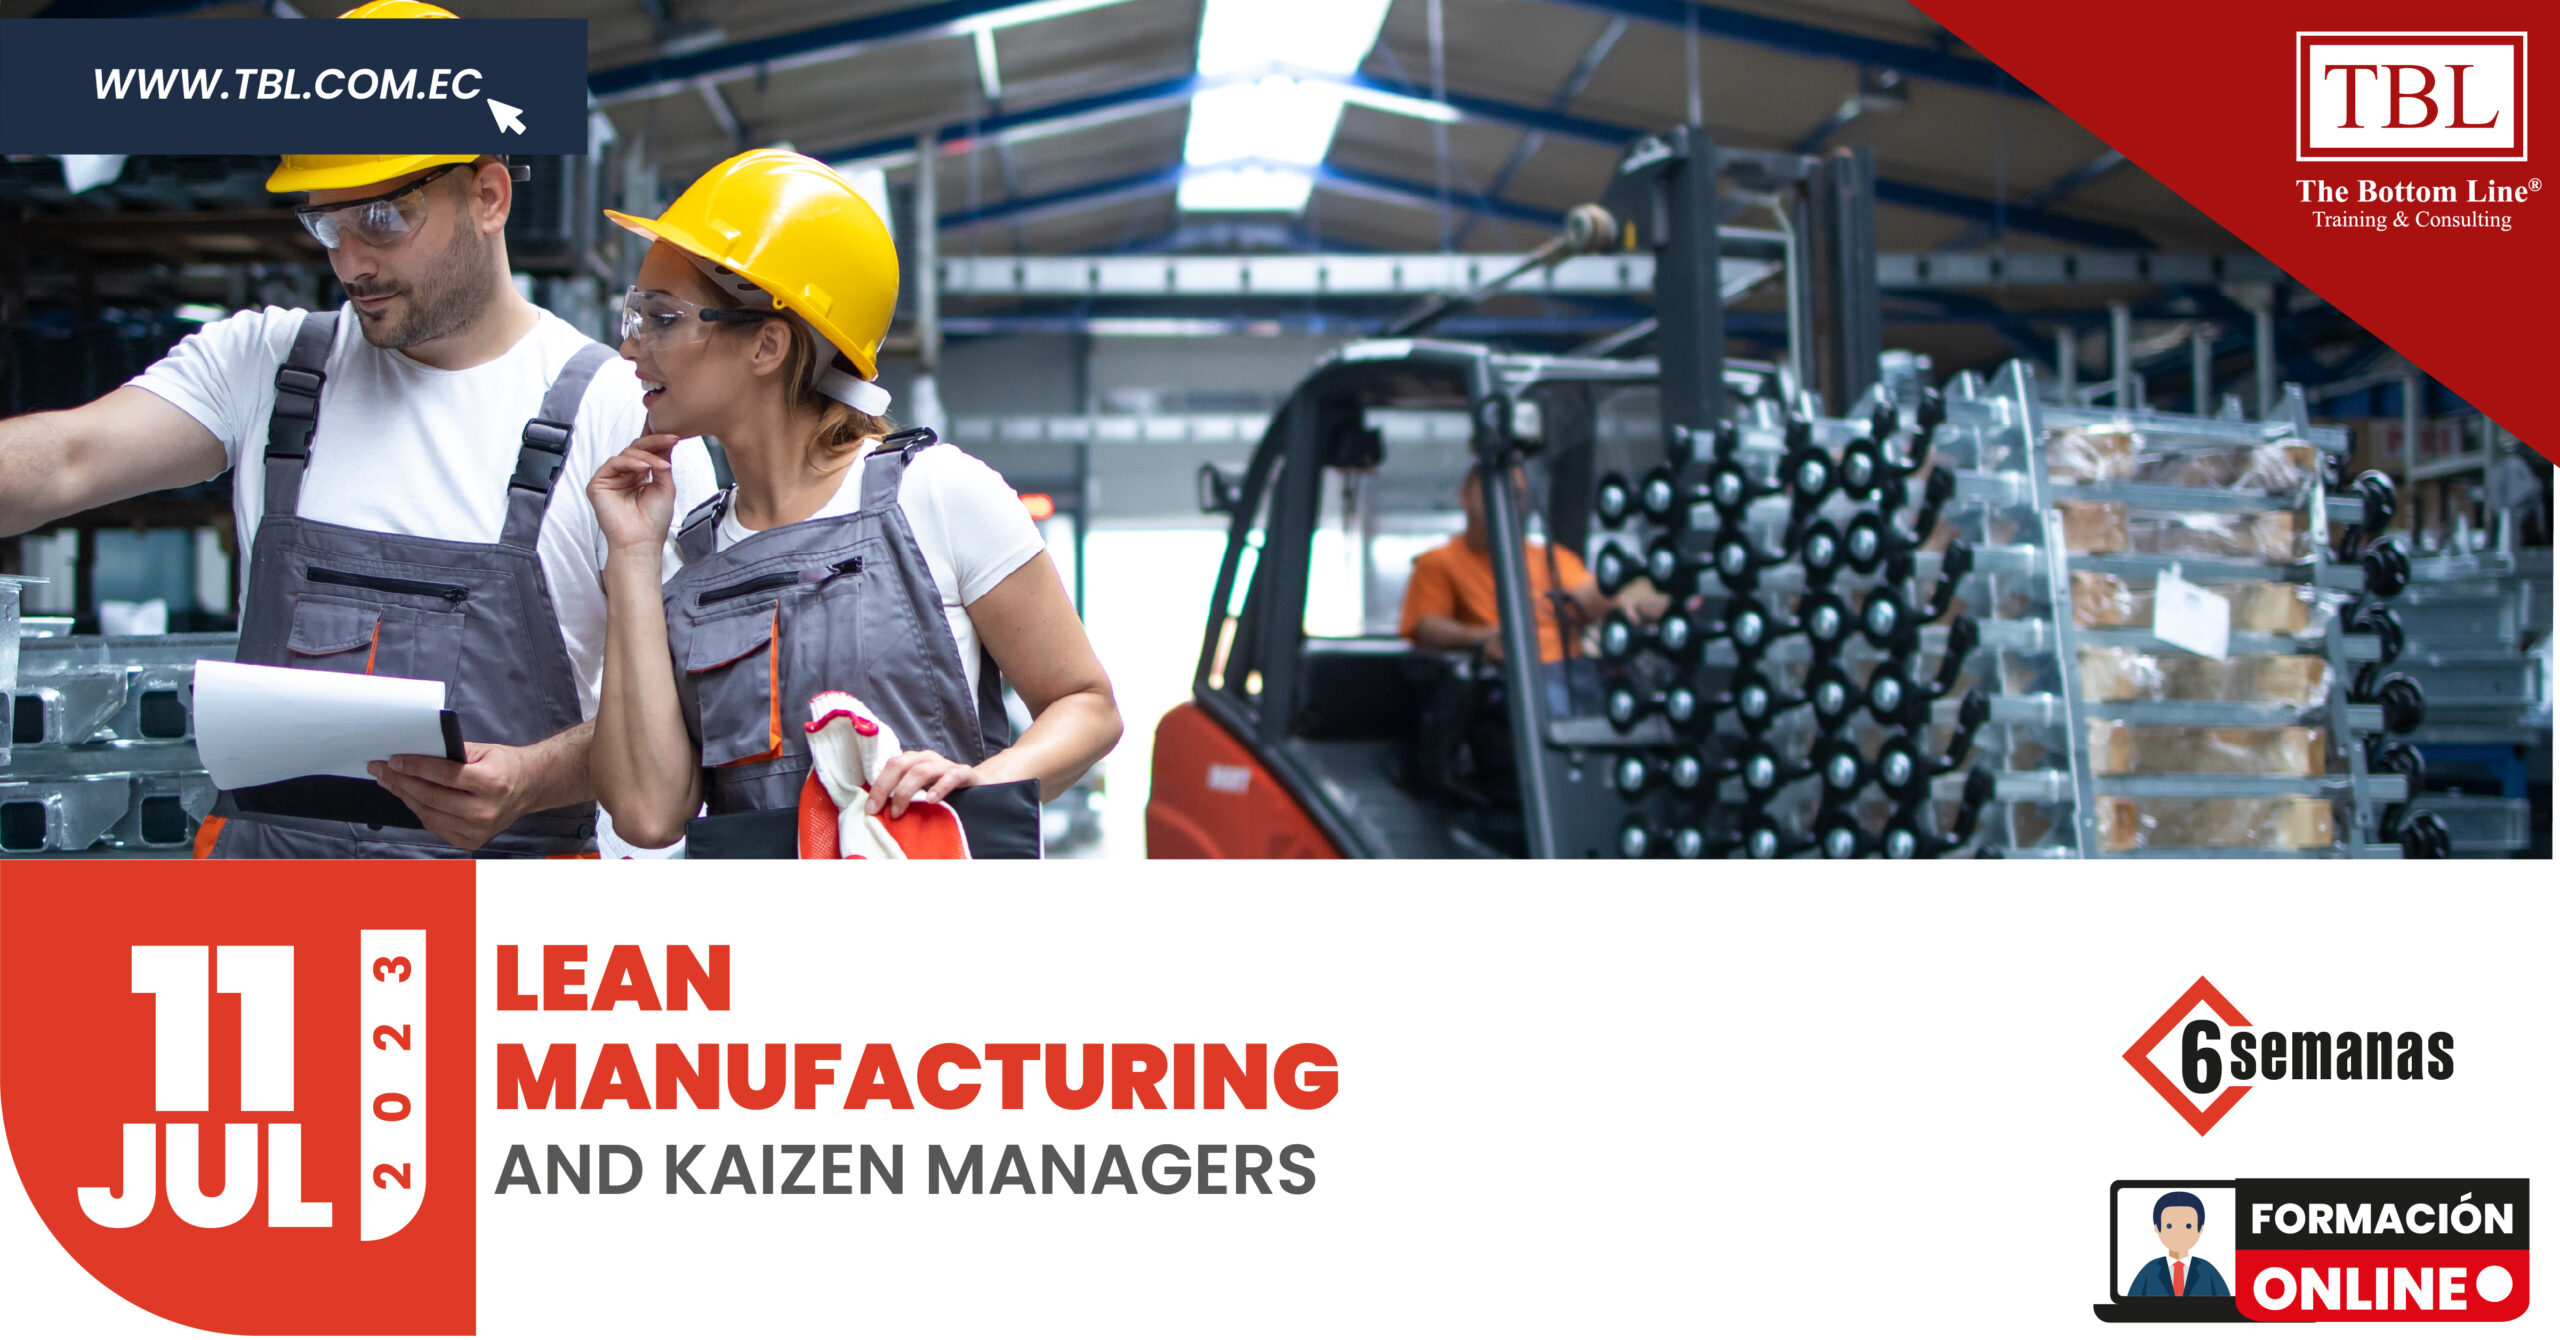 Lean Manufacturing and Kaizen Managers